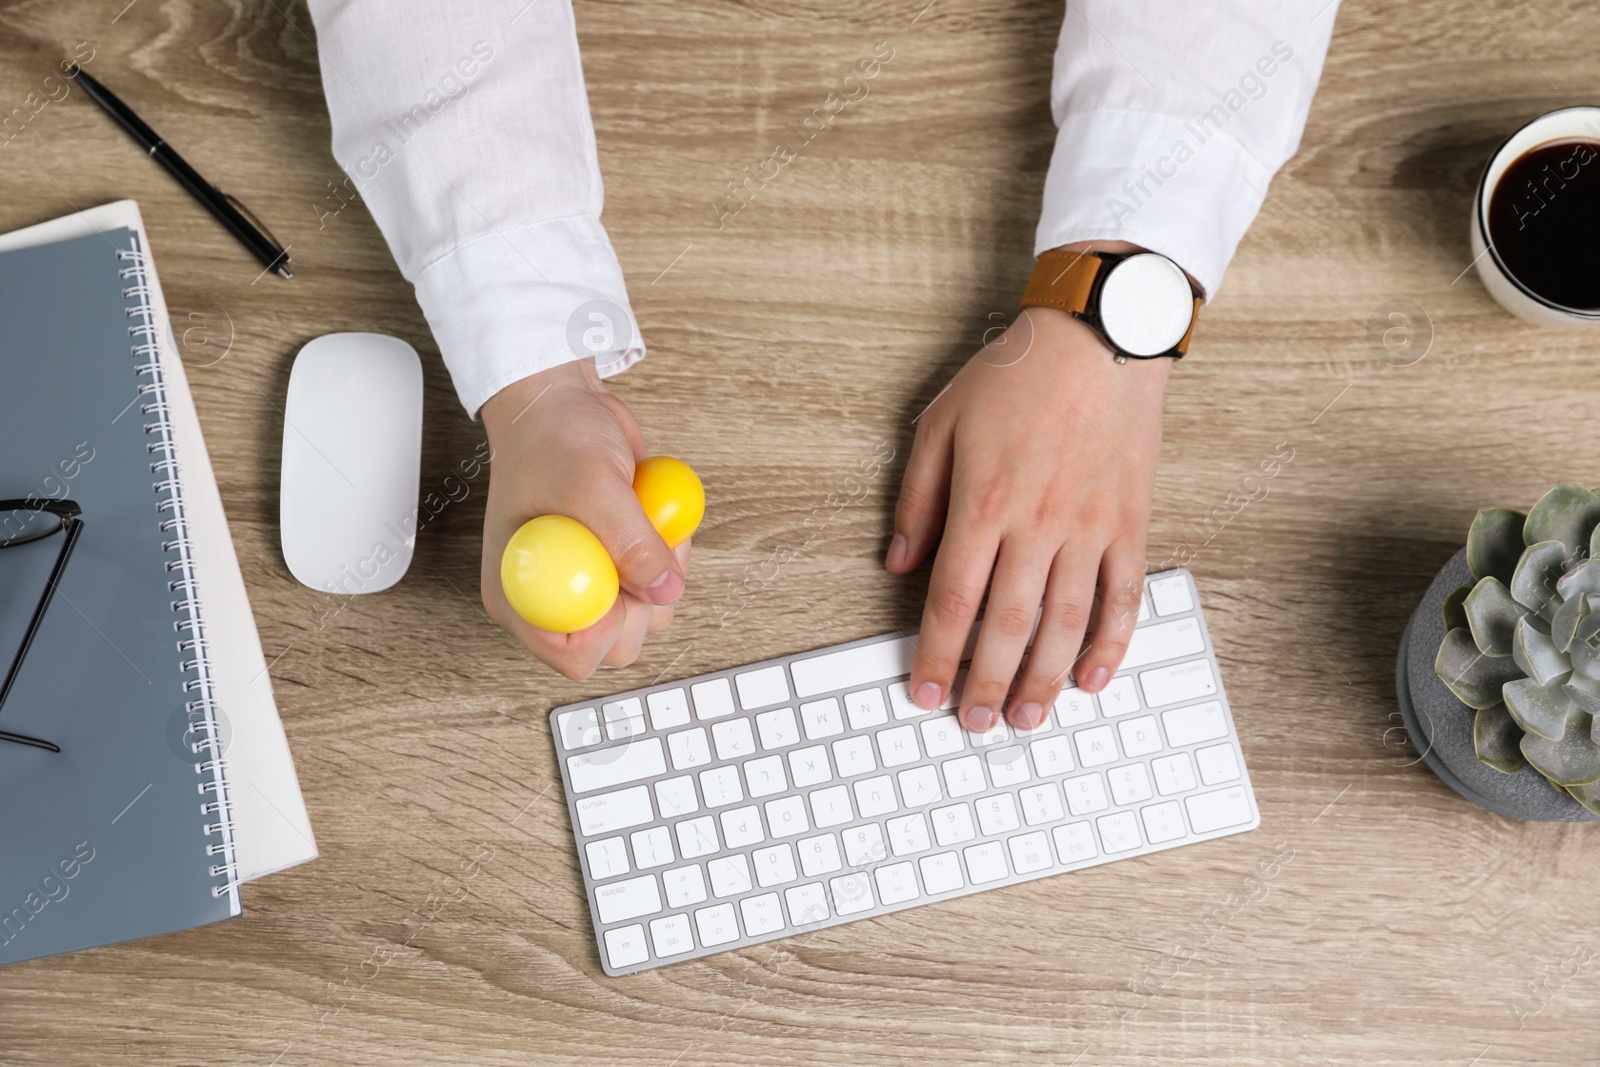 Photo of Man squeezing yellow stress ball while typing on computer keyboard at table, top view